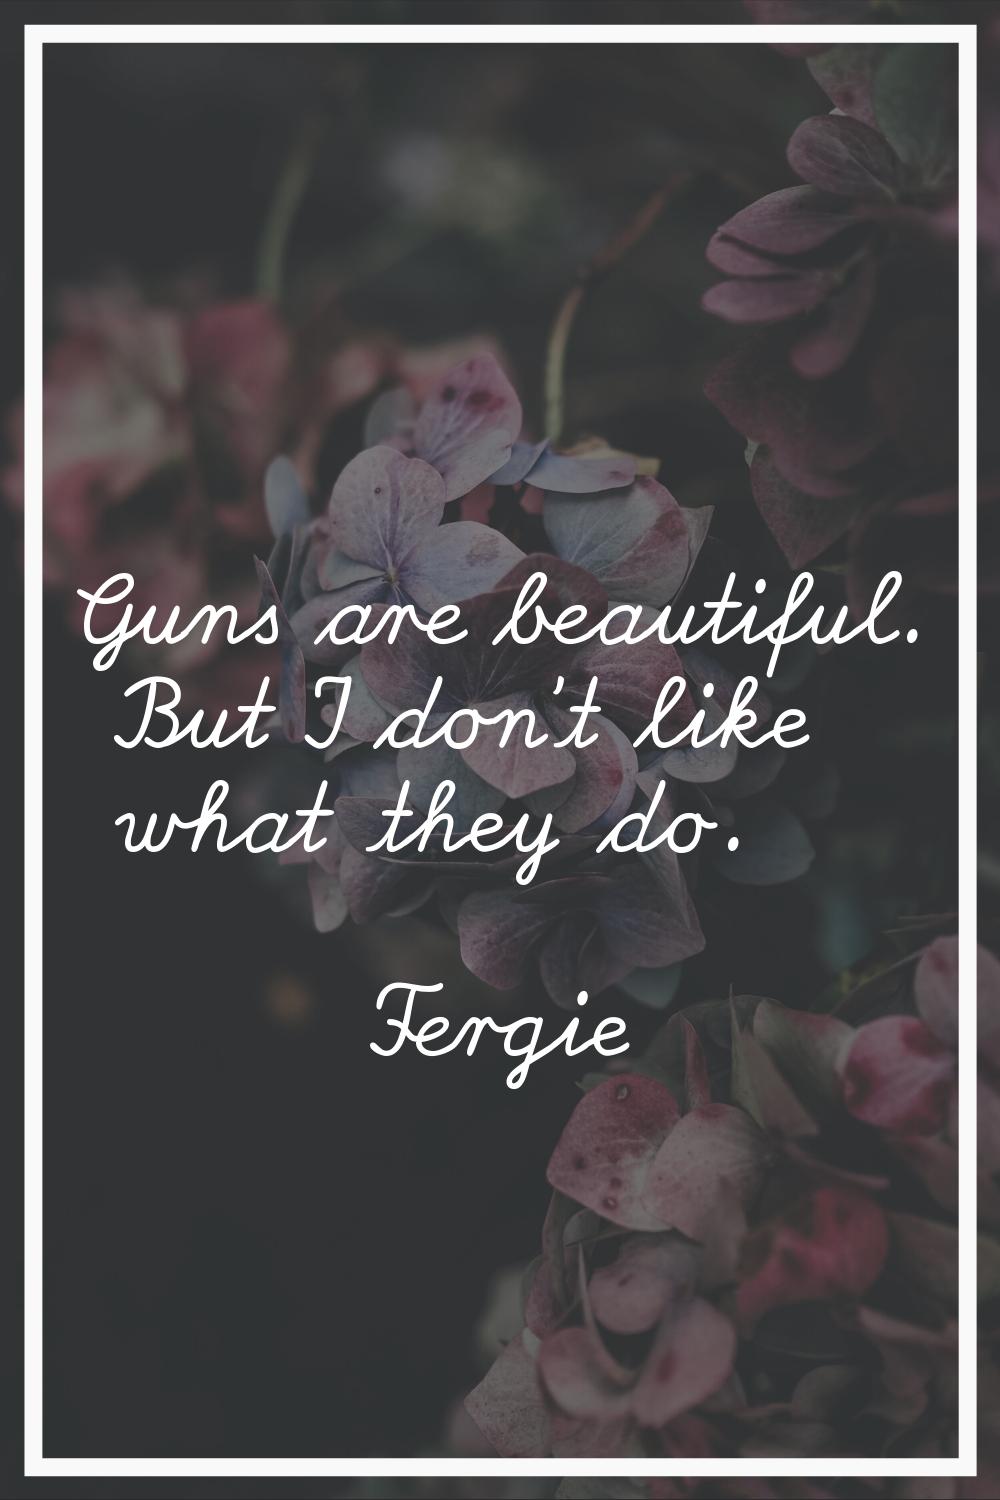 Guns are beautiful. But I don't like what they do.